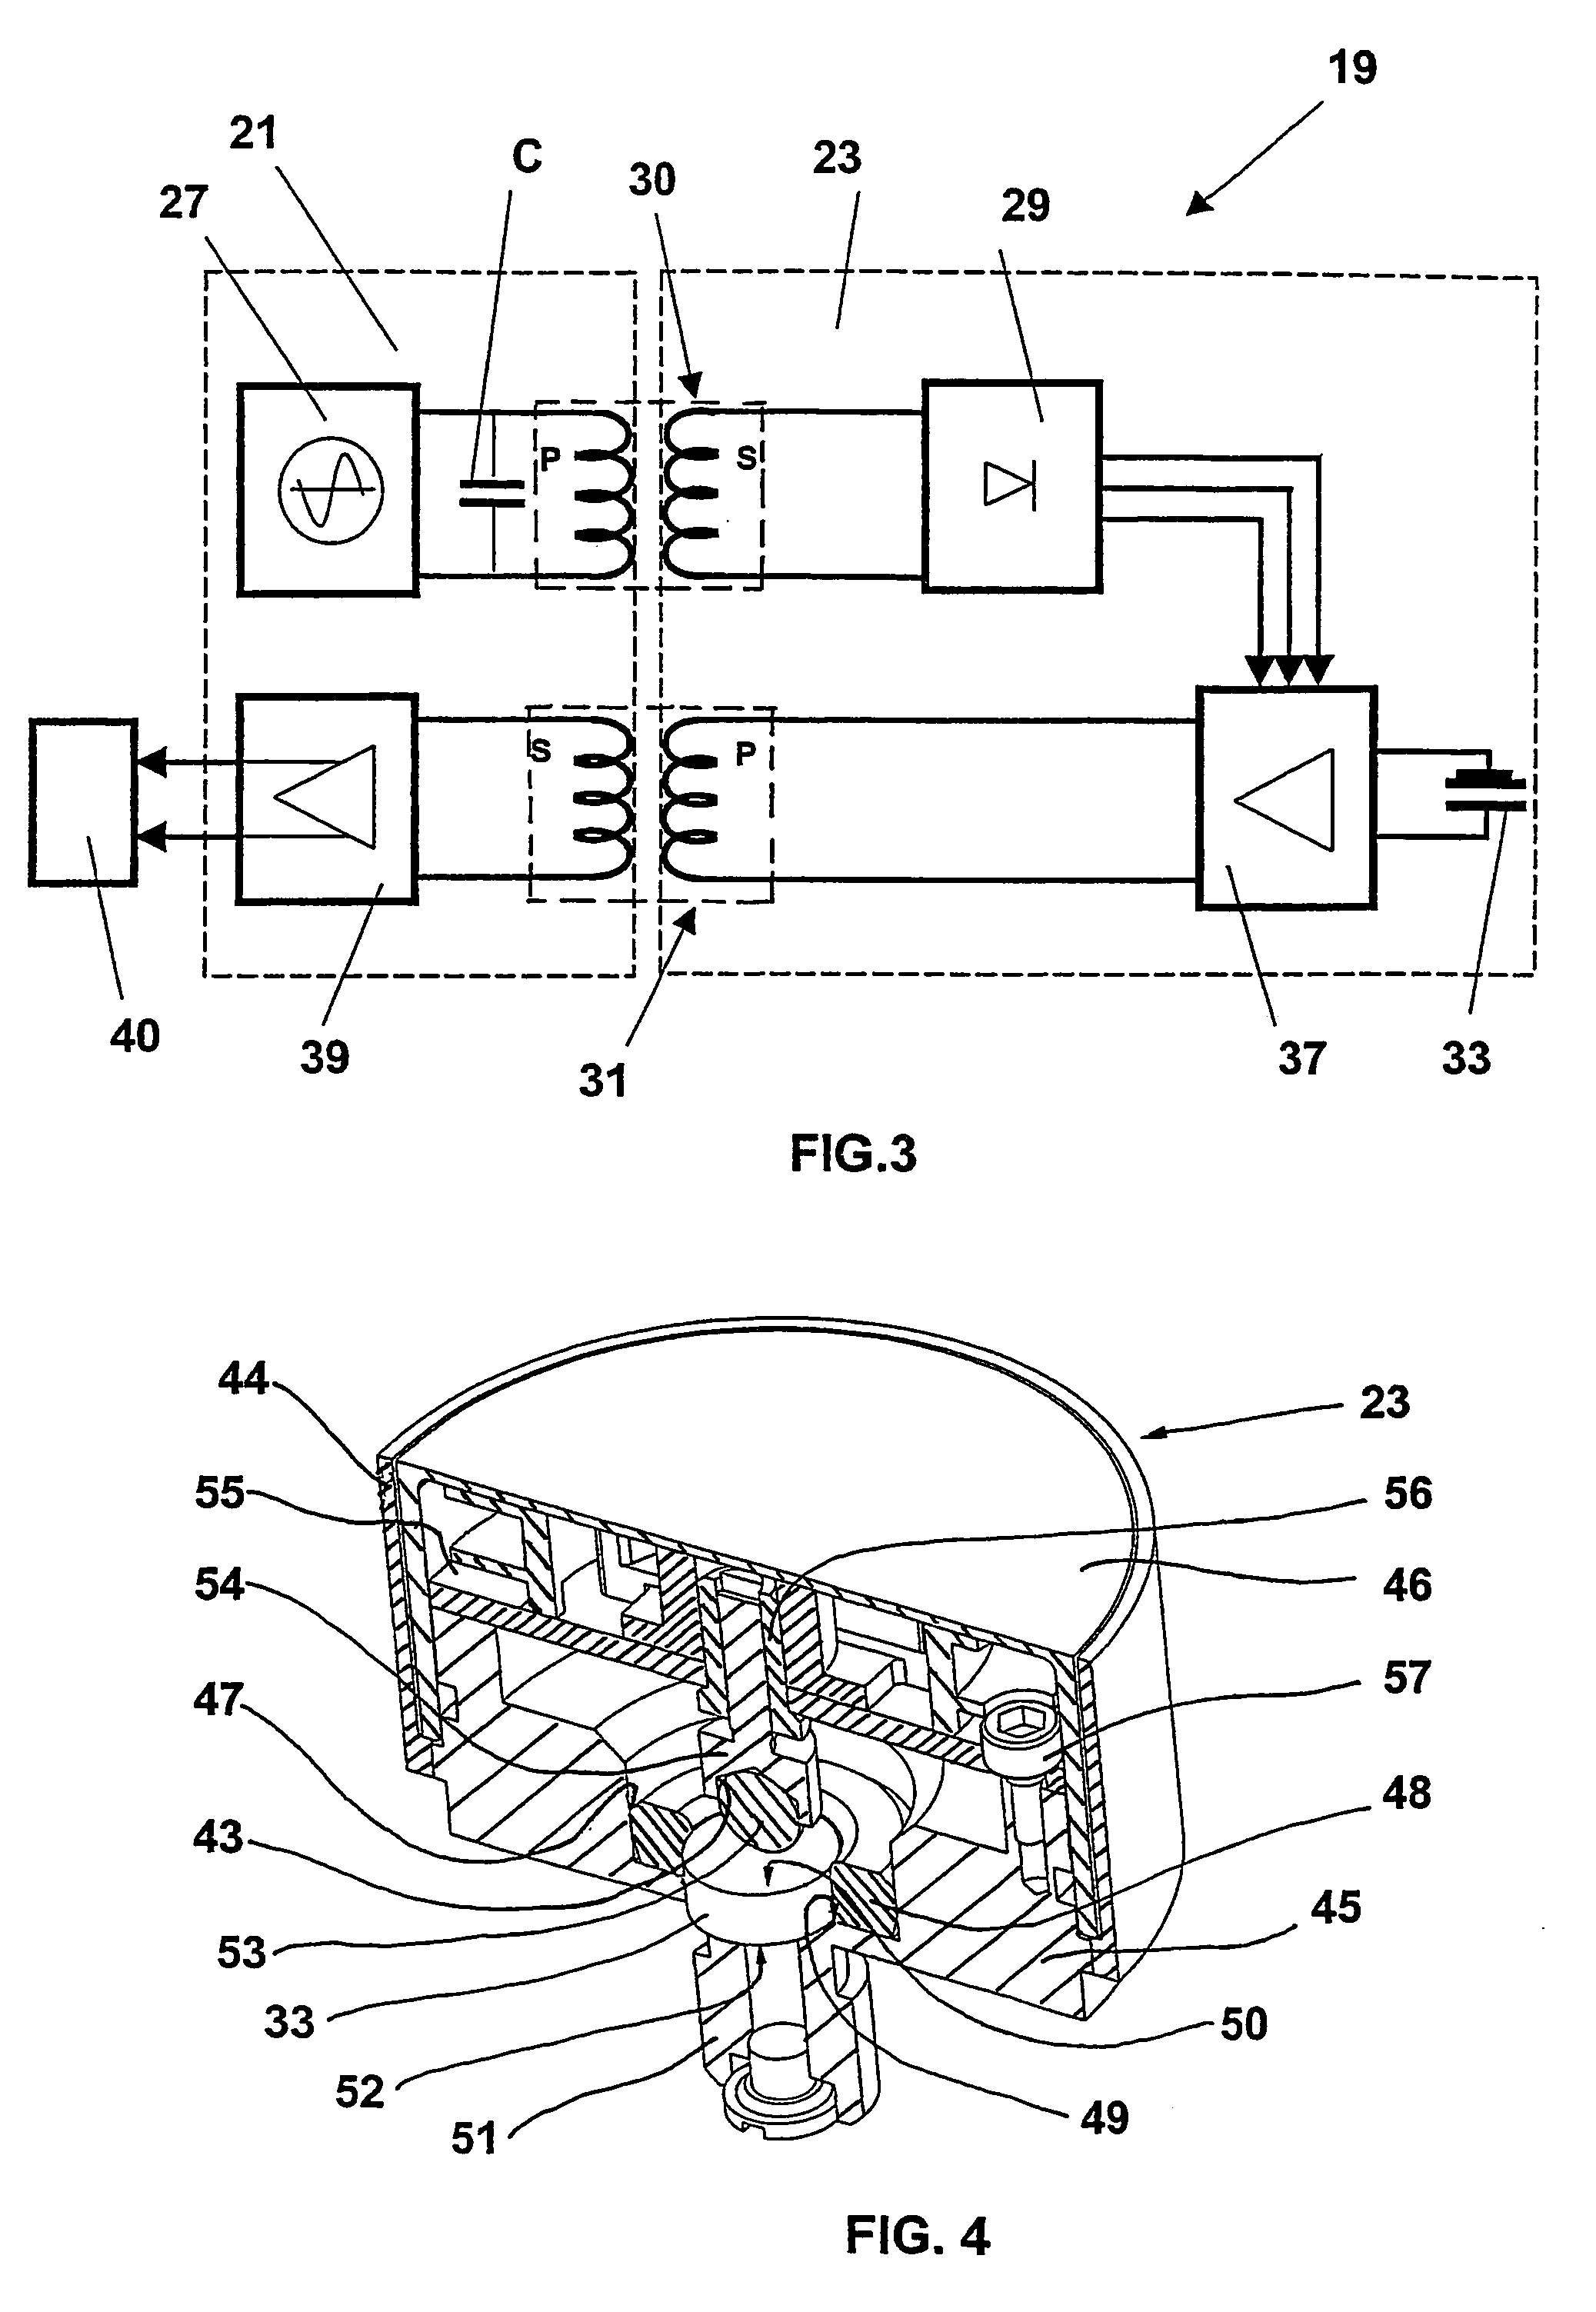 Acoustic sensor for monitoring machining processes in machining tools